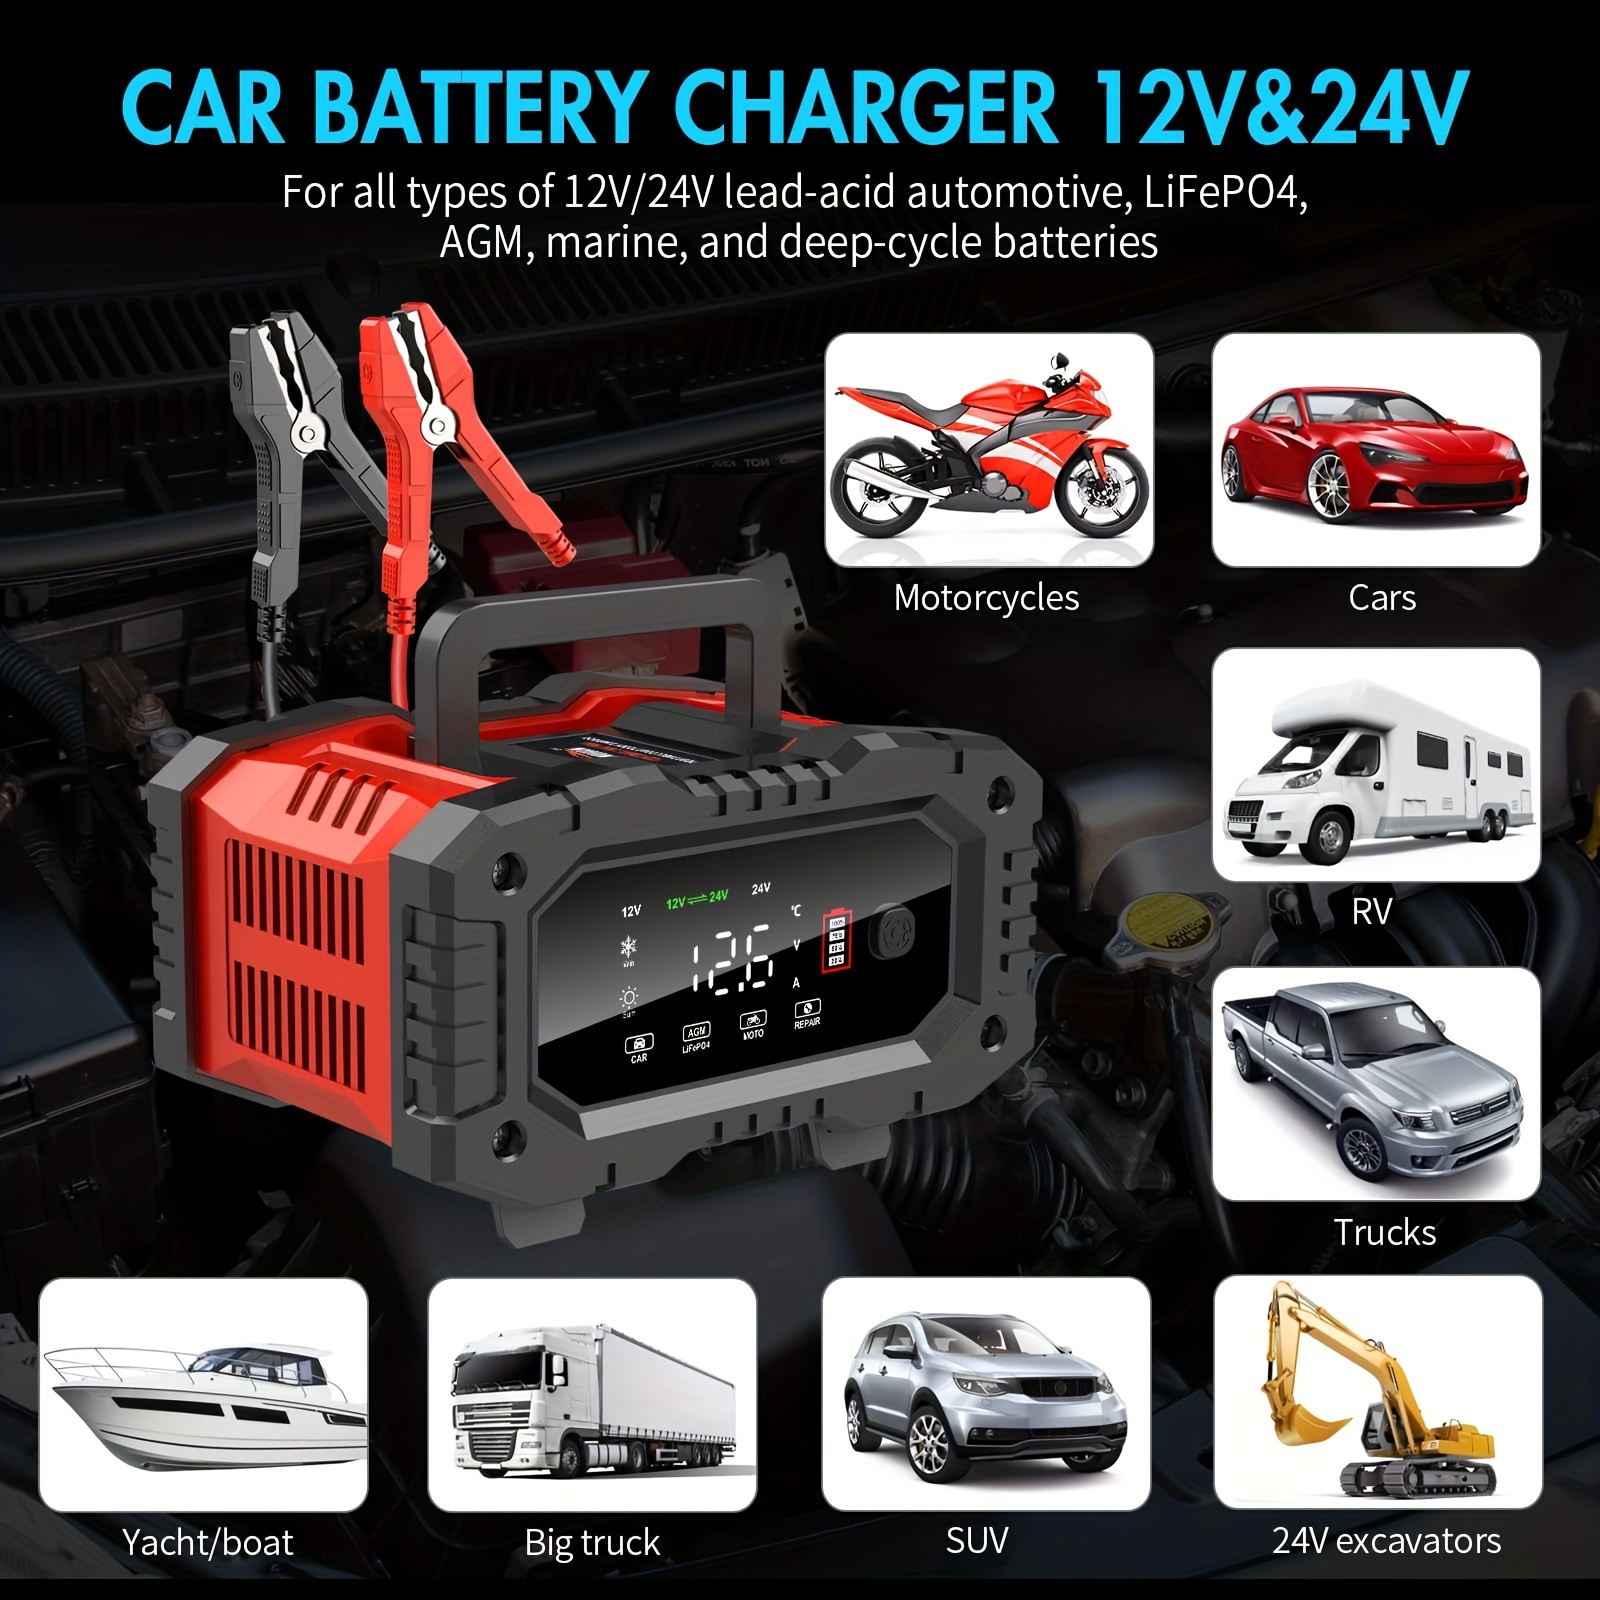 20 Amp Car Battery Charger 12v 24v Smart Automatic Battery Automotive 7  Stage Charging Maintainer Pulse Repair Function Lifepo4 Trickle Charger, Find Great Deals